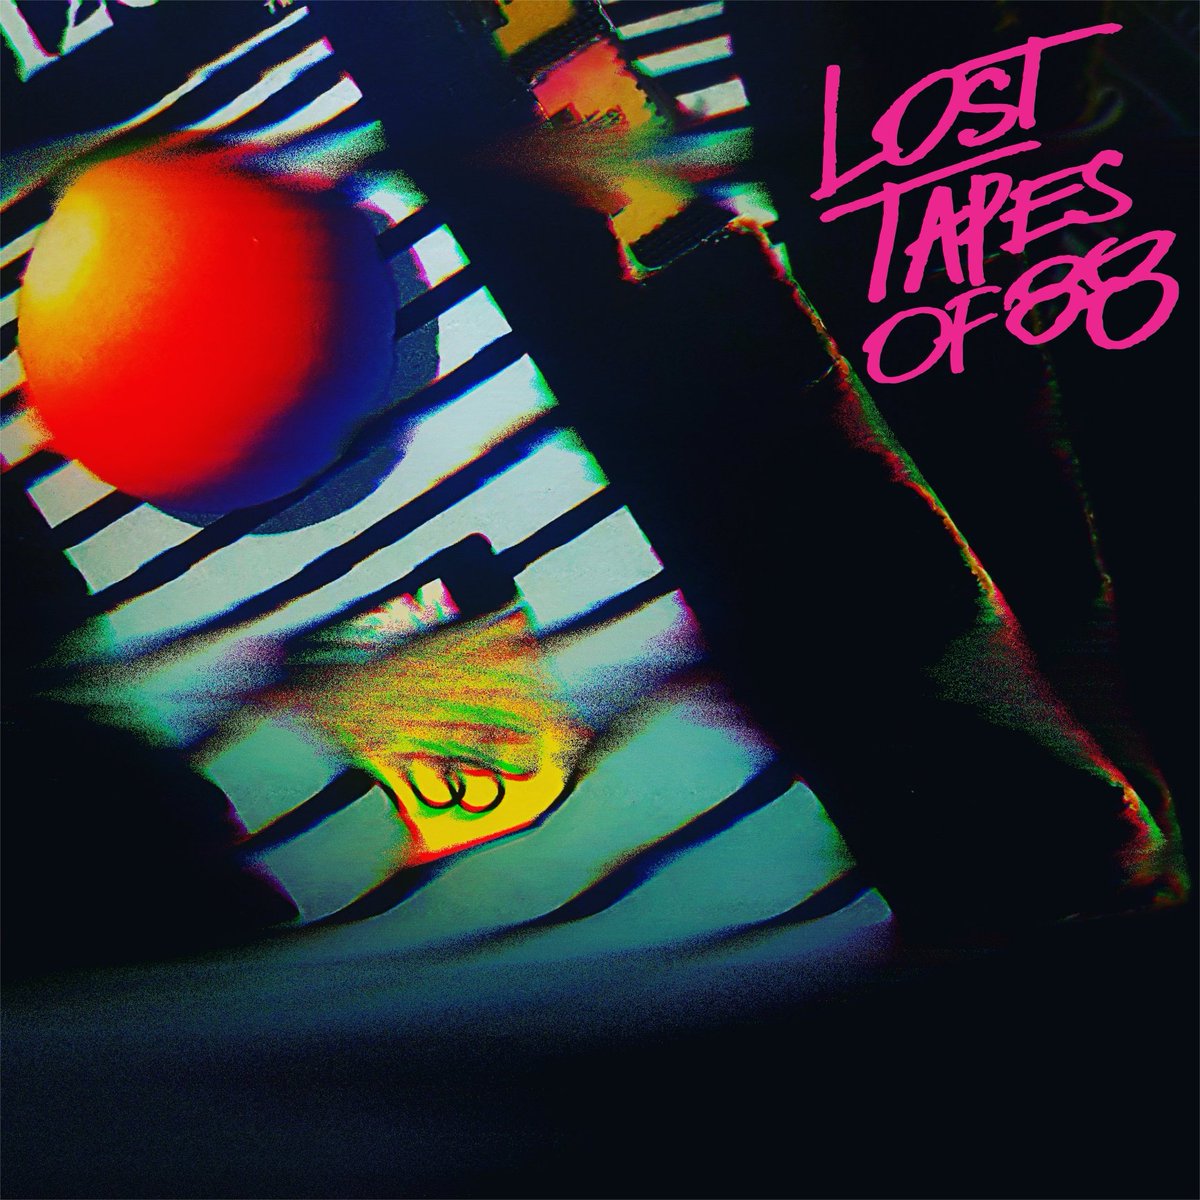 Álbum no ar / #OUTNOW
LOST TAPES OF 88 - LOST TAPES OF 88 [6 Plusten Records]

open.spotify.com/album/3GSARDuH…

#synthwave #retrowave #outrun #losttapesof88 #synthwavebrasil #quizzik #80s #comtruise #kavinsky